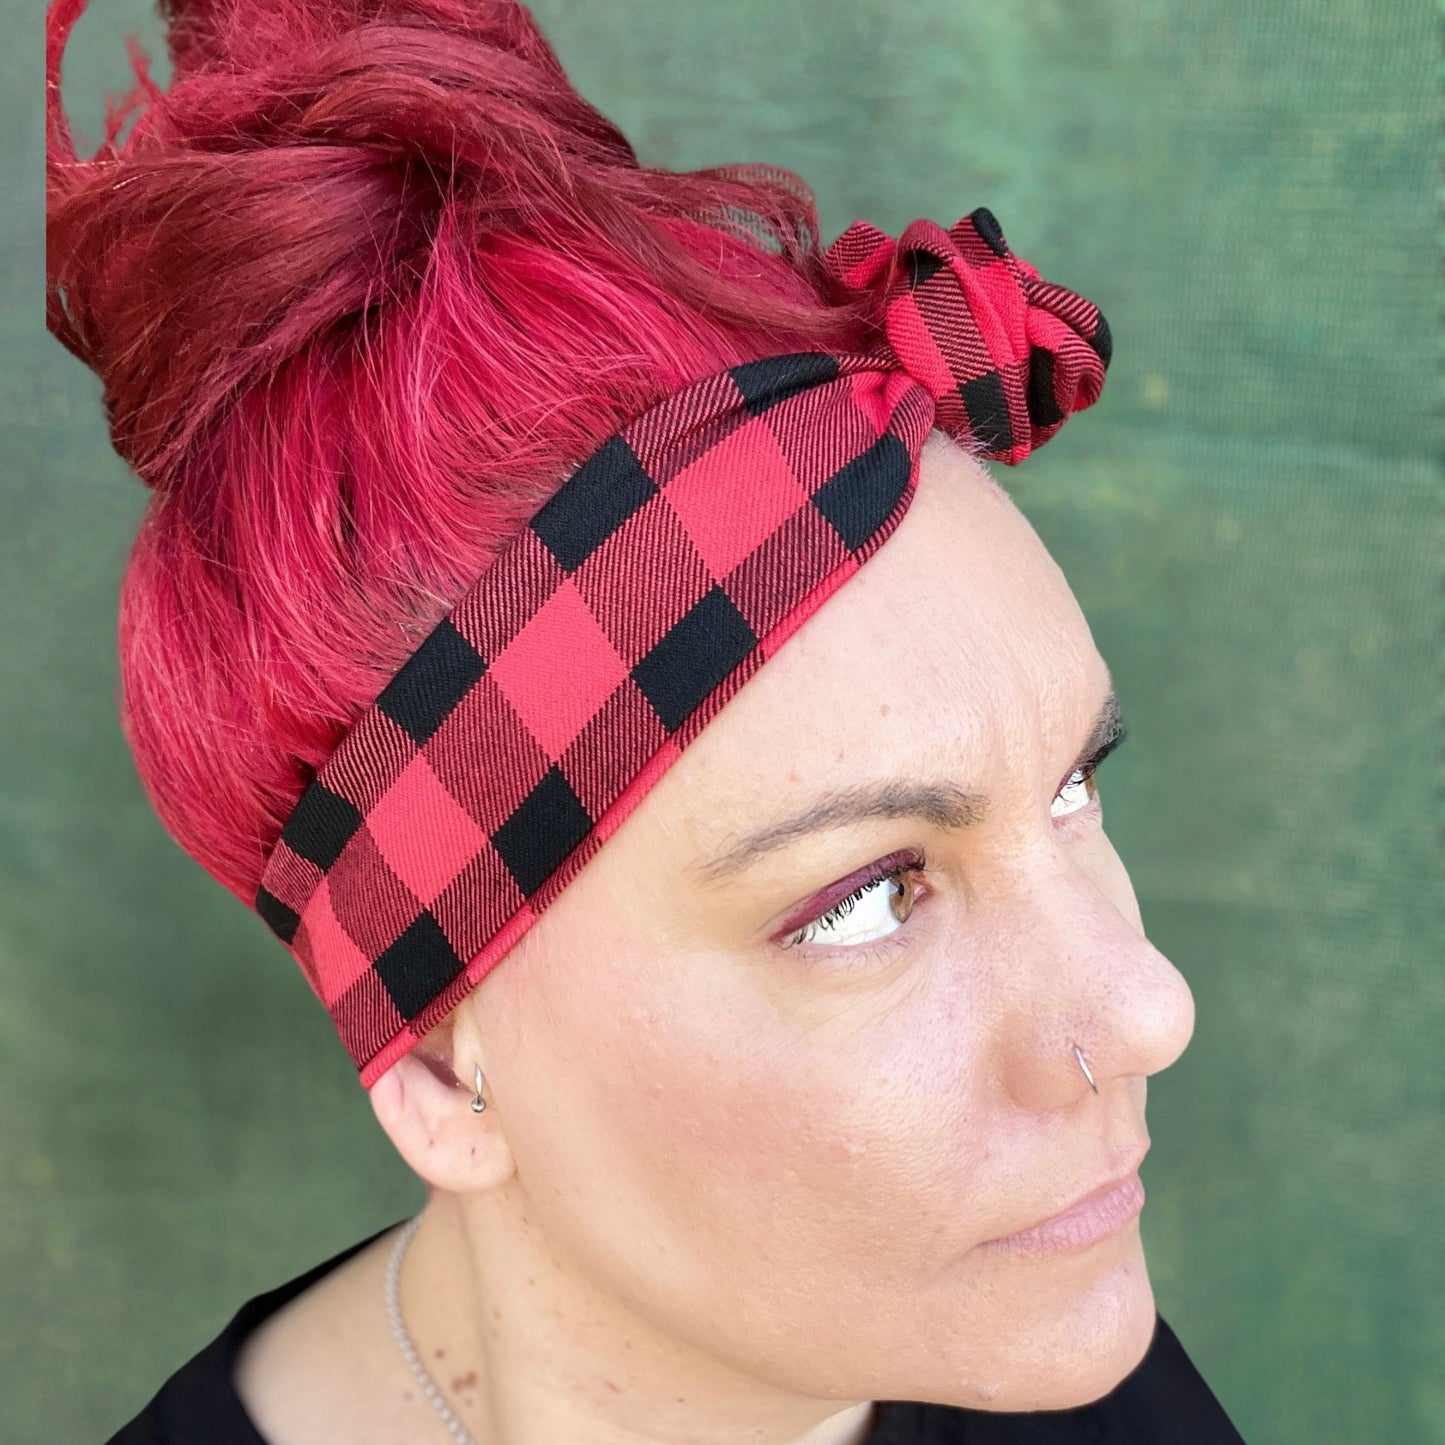 Warm Red and black gingham Wire headband Brace the cold in style with our Perfect Winter head warmer. Expertly crafted in Melbourne, our head warmers provide the ultimate blend of warmth and style. Explore our collection and find the ideal accessory to elevate your winter wardrobe. Experience the warmth, embrace the style!